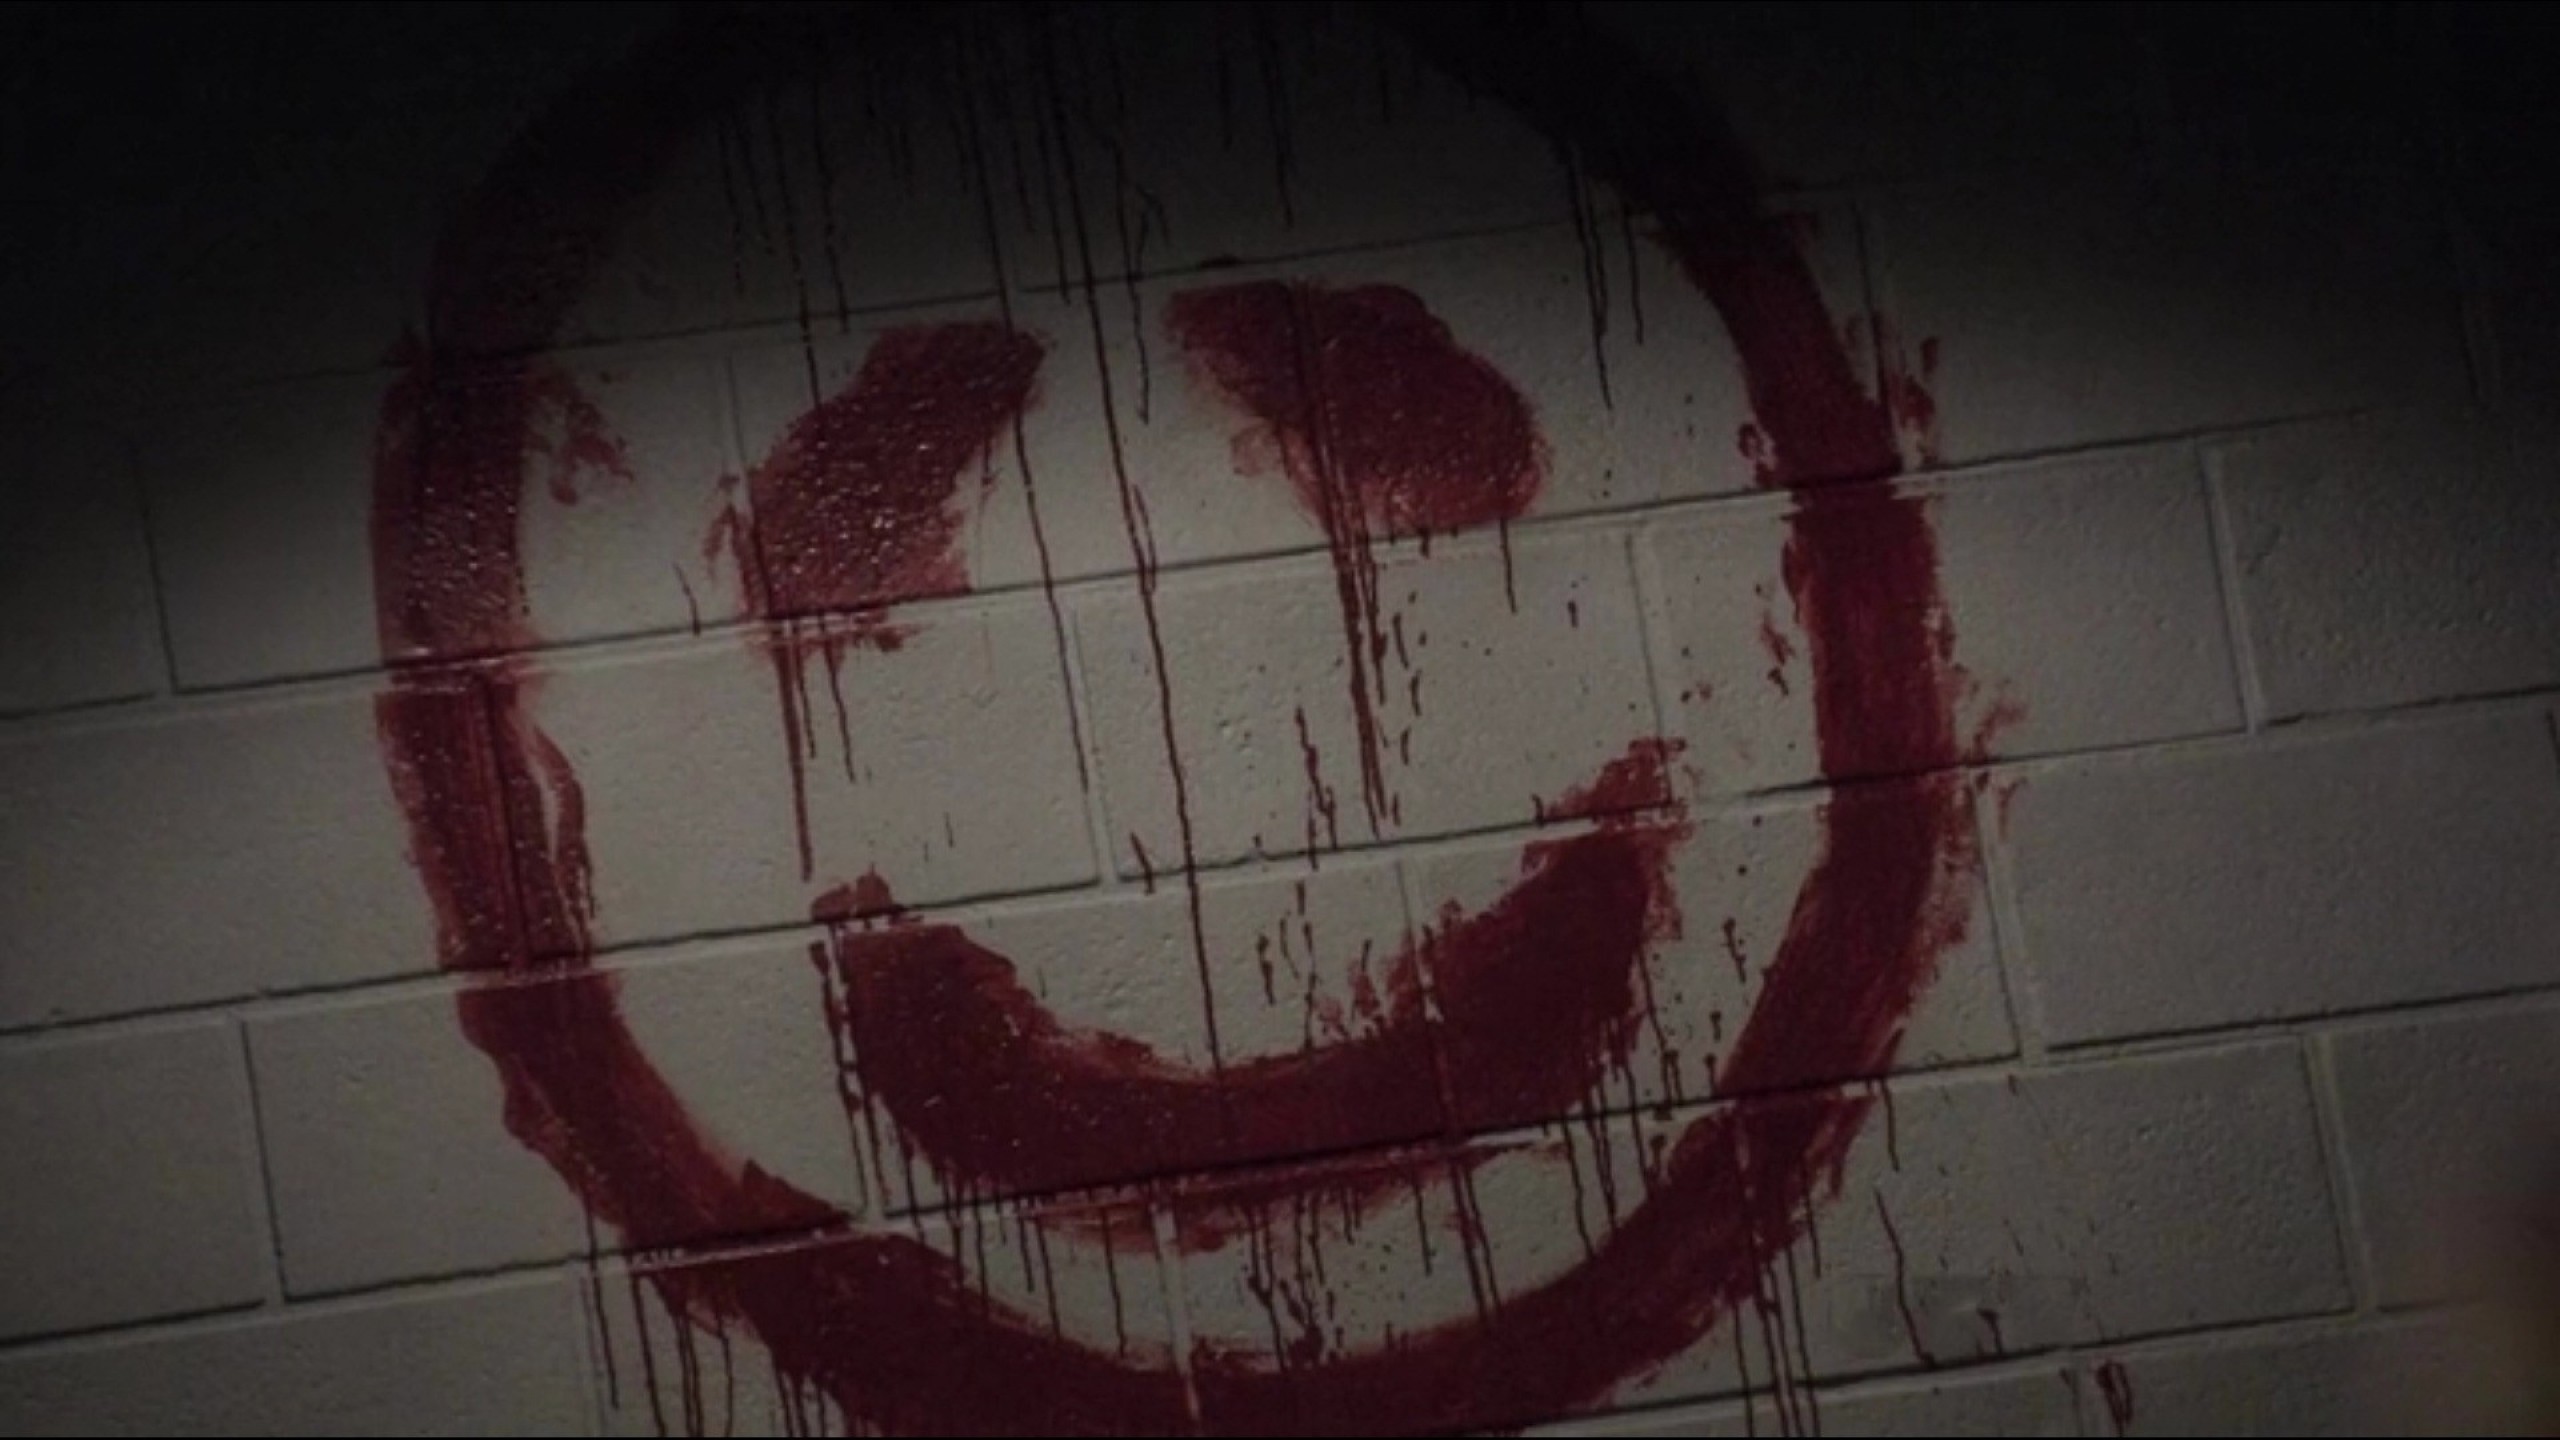 2560x1440 Big Smiles: The Legacy of the Unsolved Smiley Face Killer